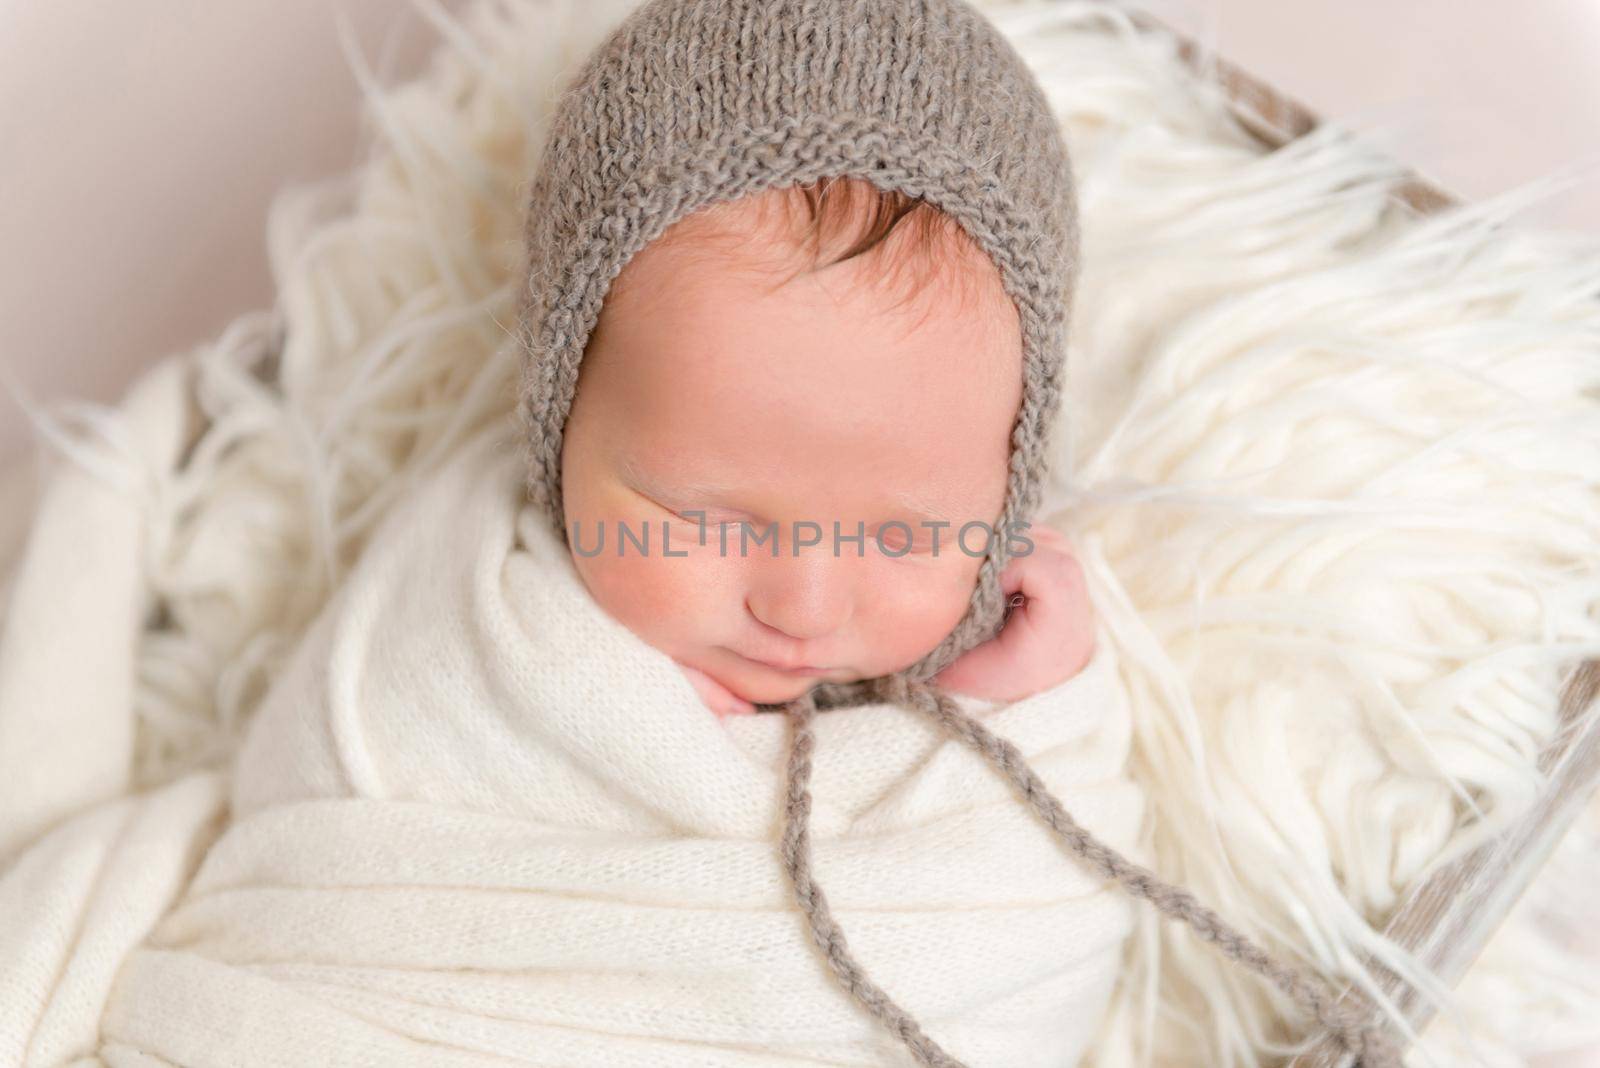 Cute infant with knitted gray hat on napping with hand next to his cheek, closeup